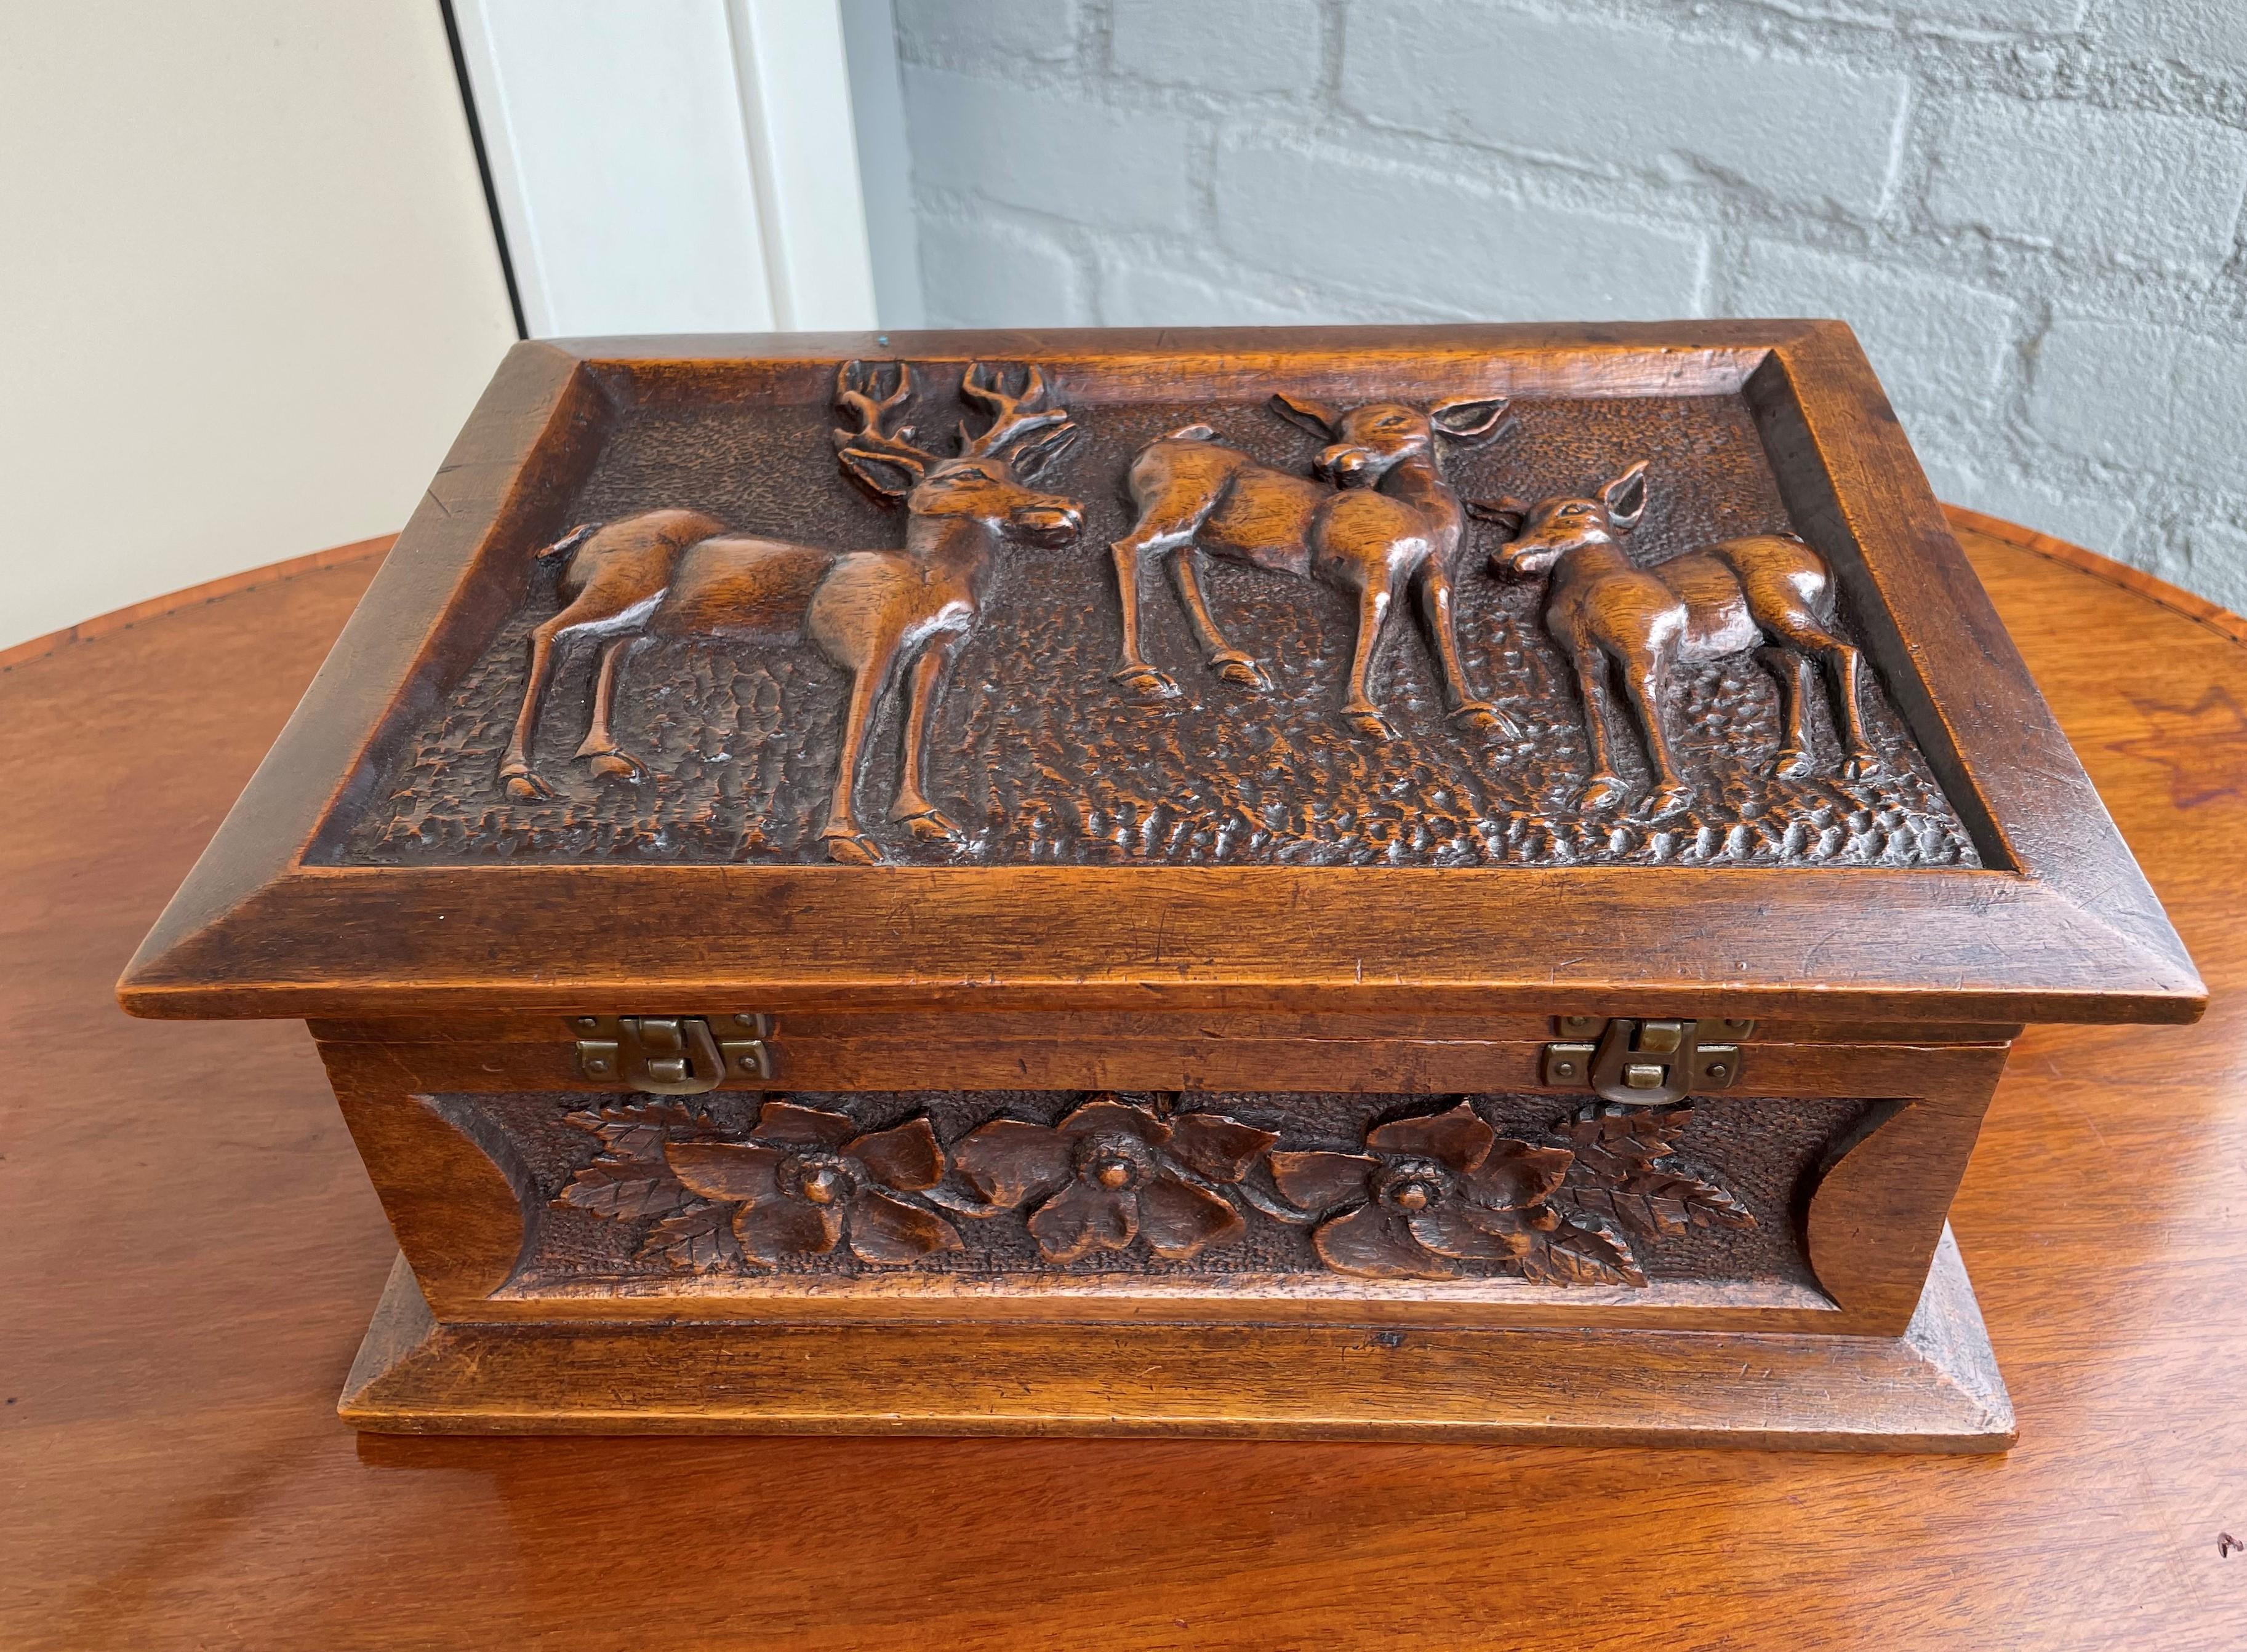 Stunning Arts & Crafts Box with Hand Carved Deer Sculptures in Deep Relief, 1910 3